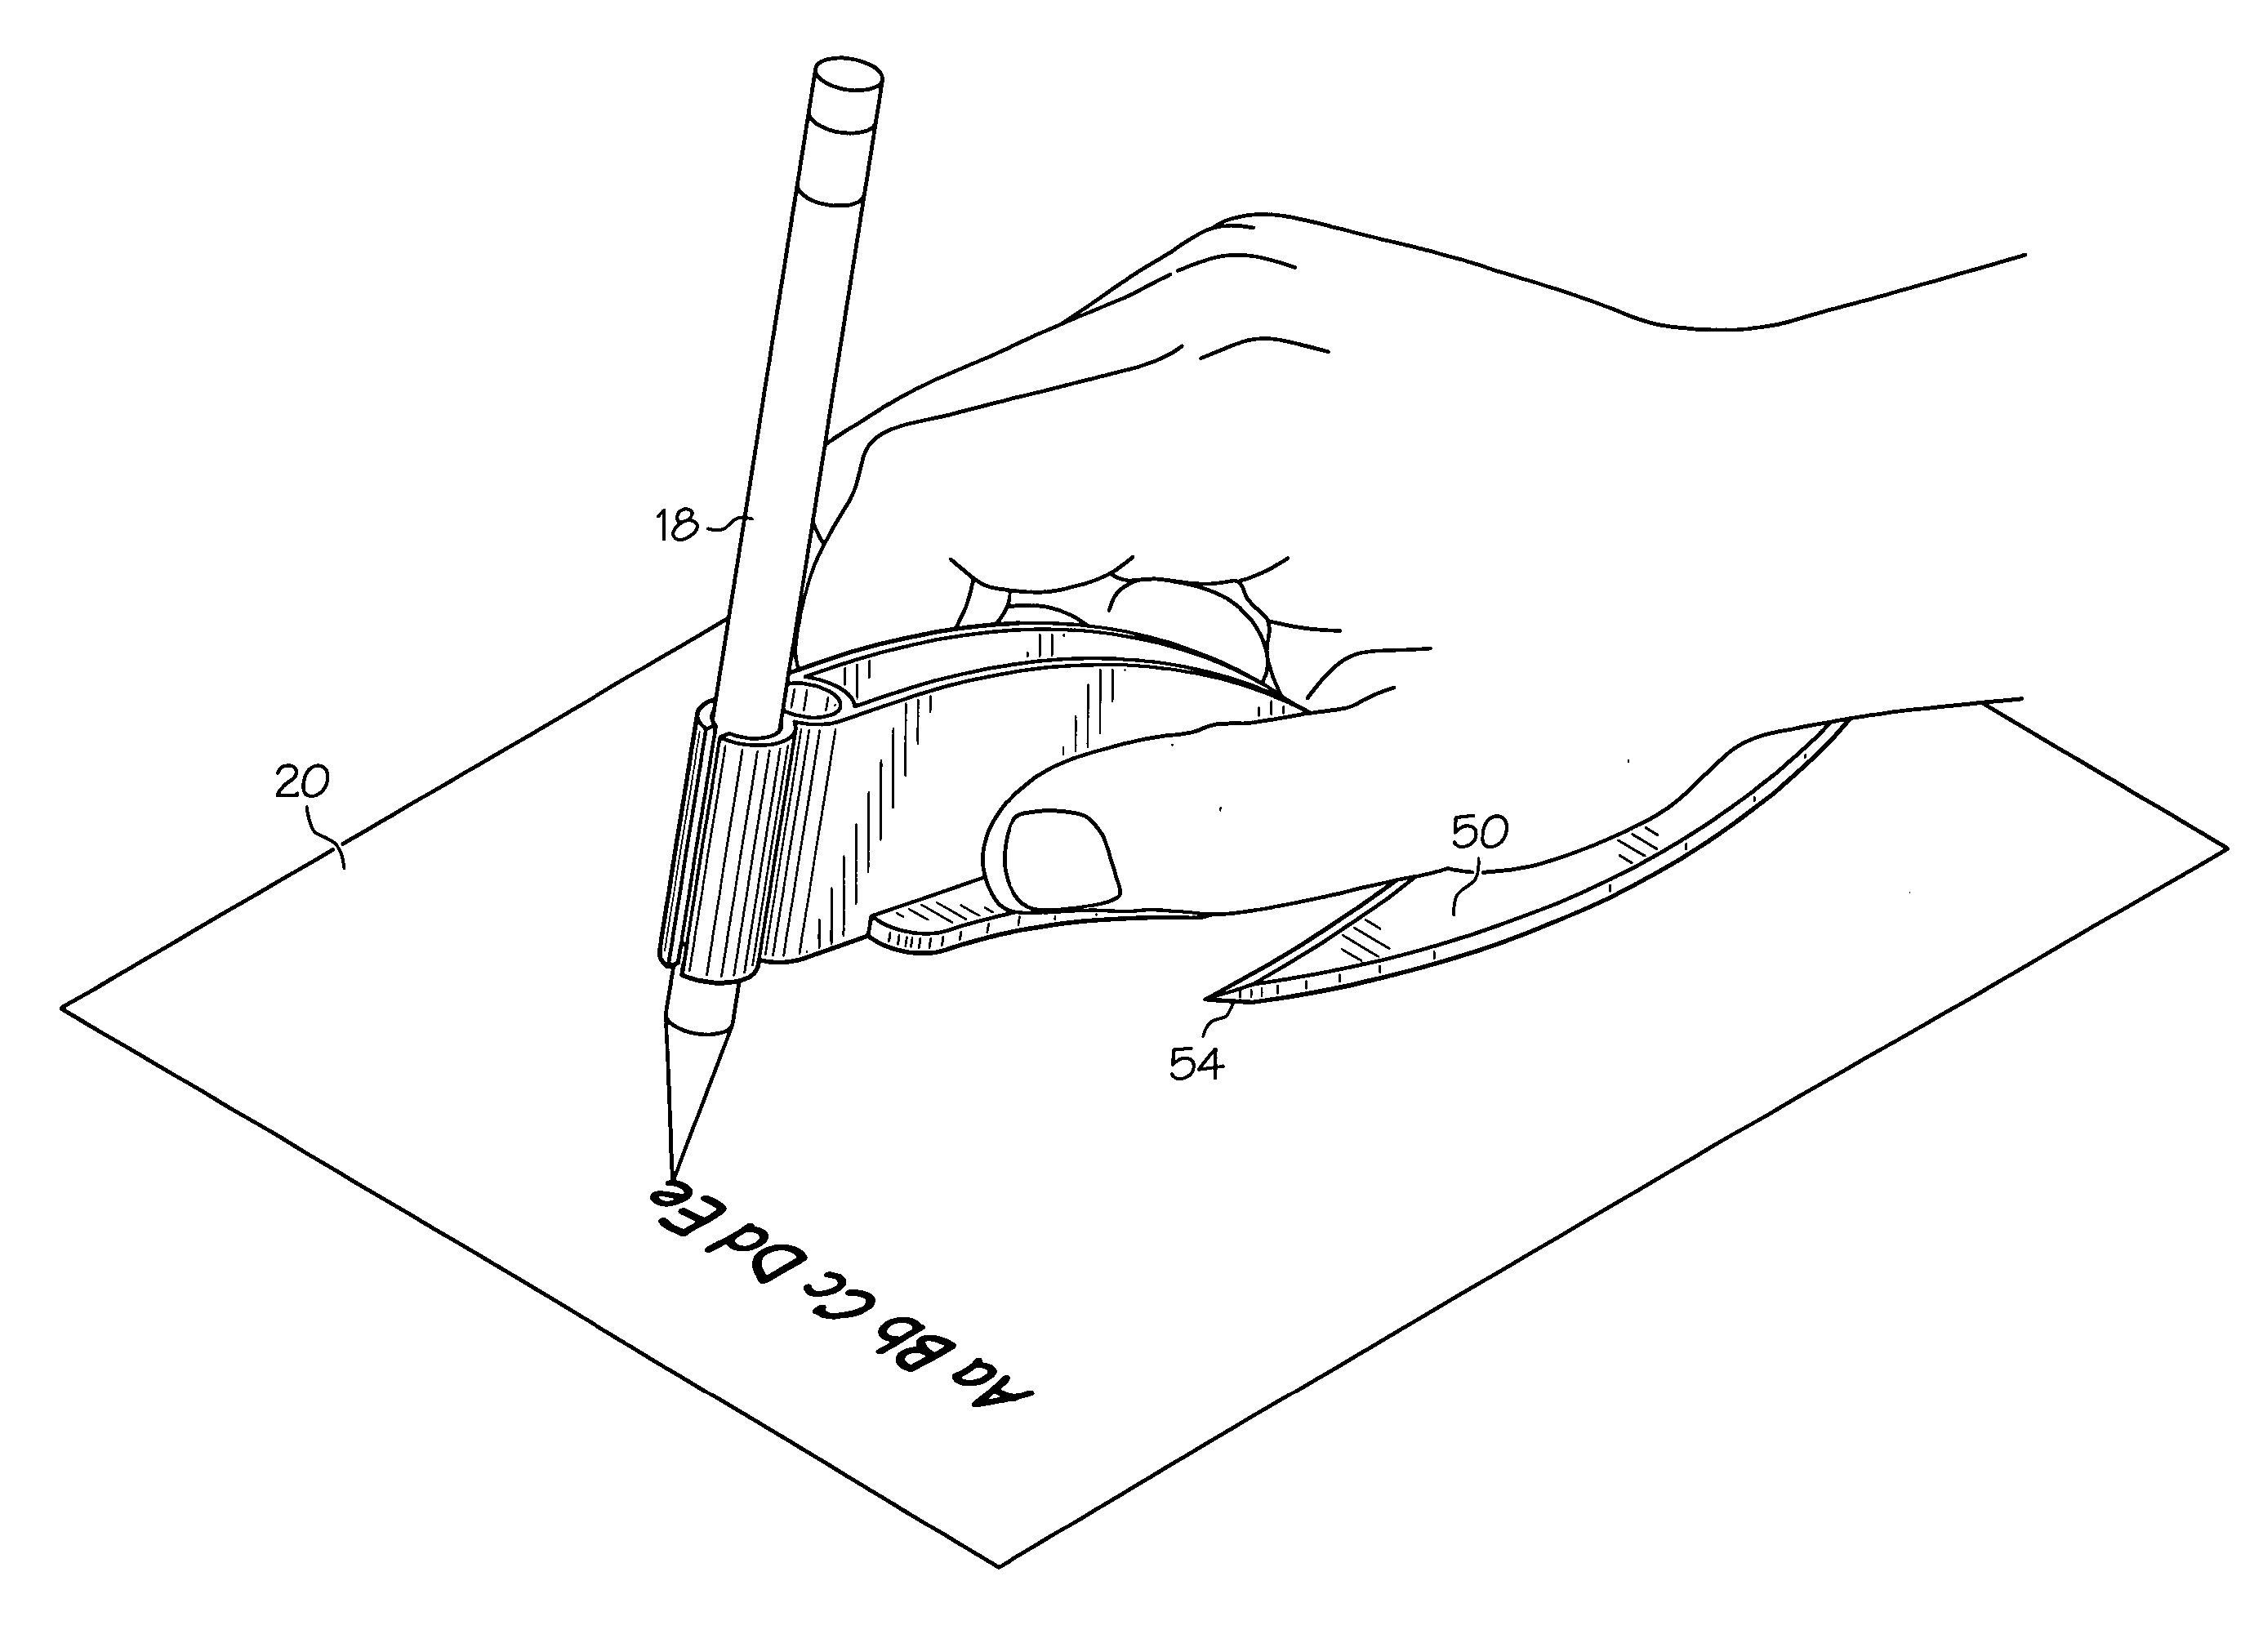 Writing instrument holder and hand support